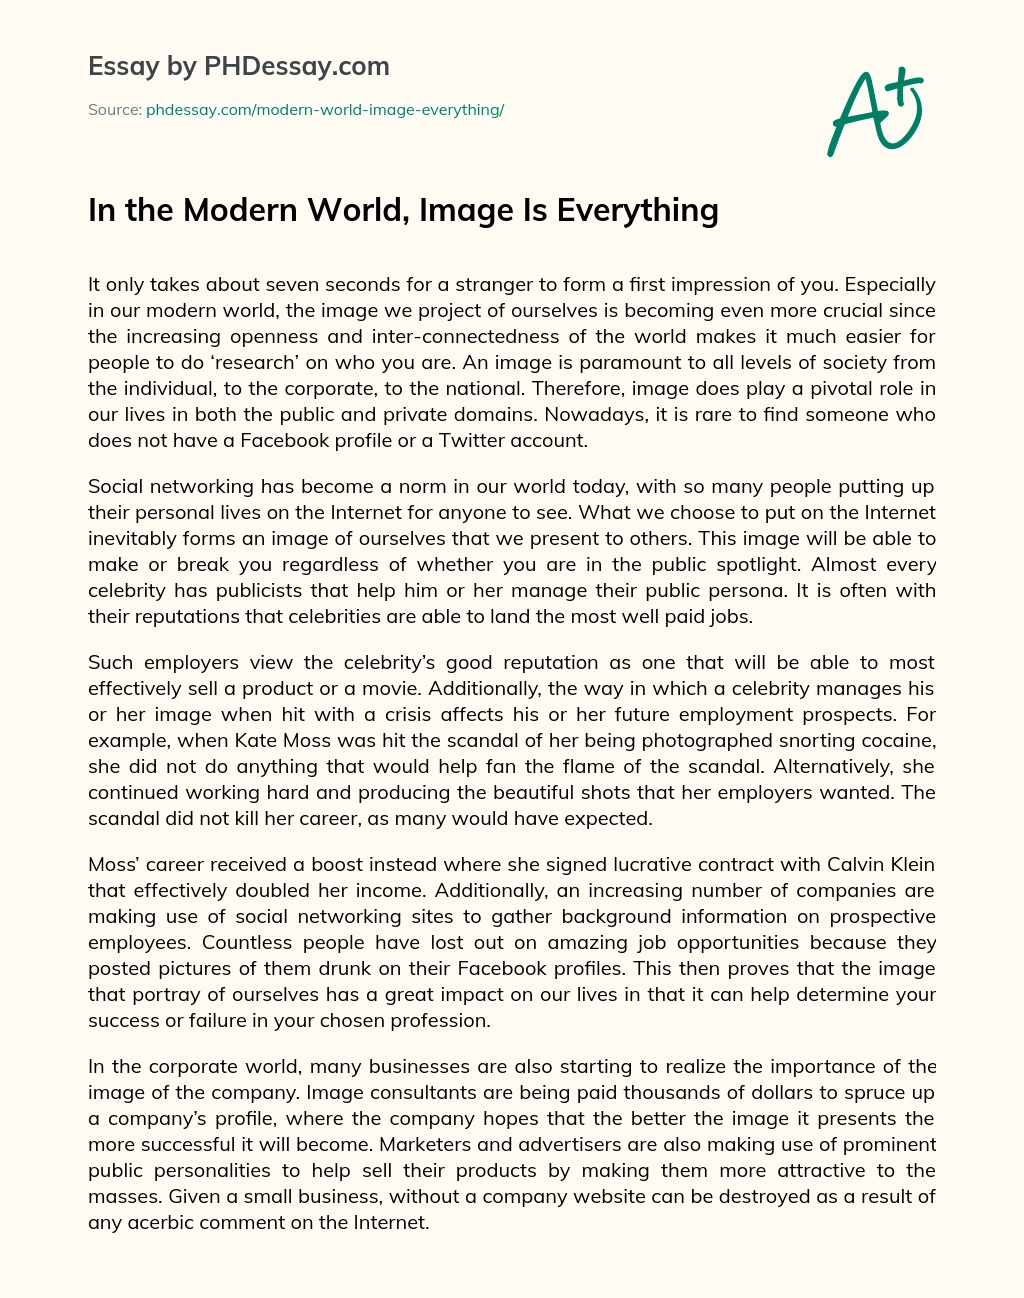 In the Modern World, Image Is Everything essay